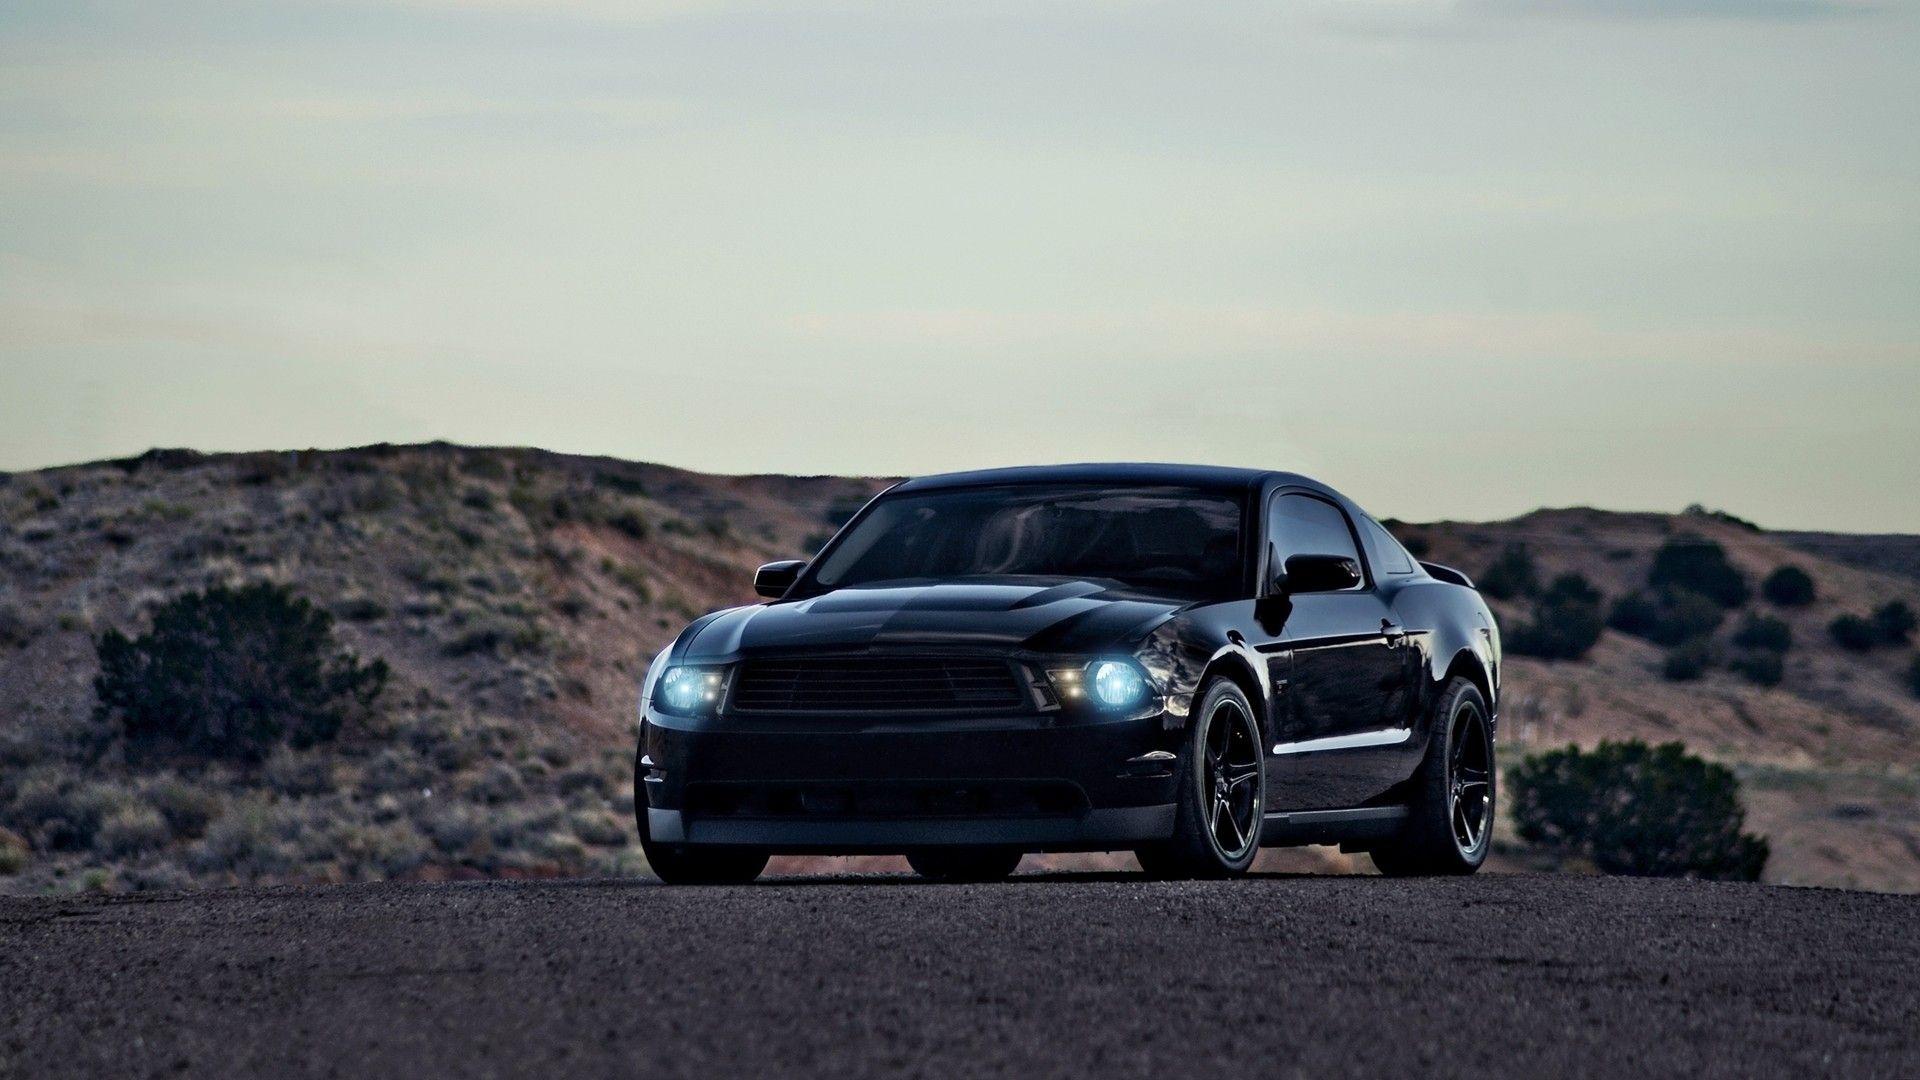 blue, black, cars, Ford, roads, vehicles, Ford Mustang, Shelby GT500